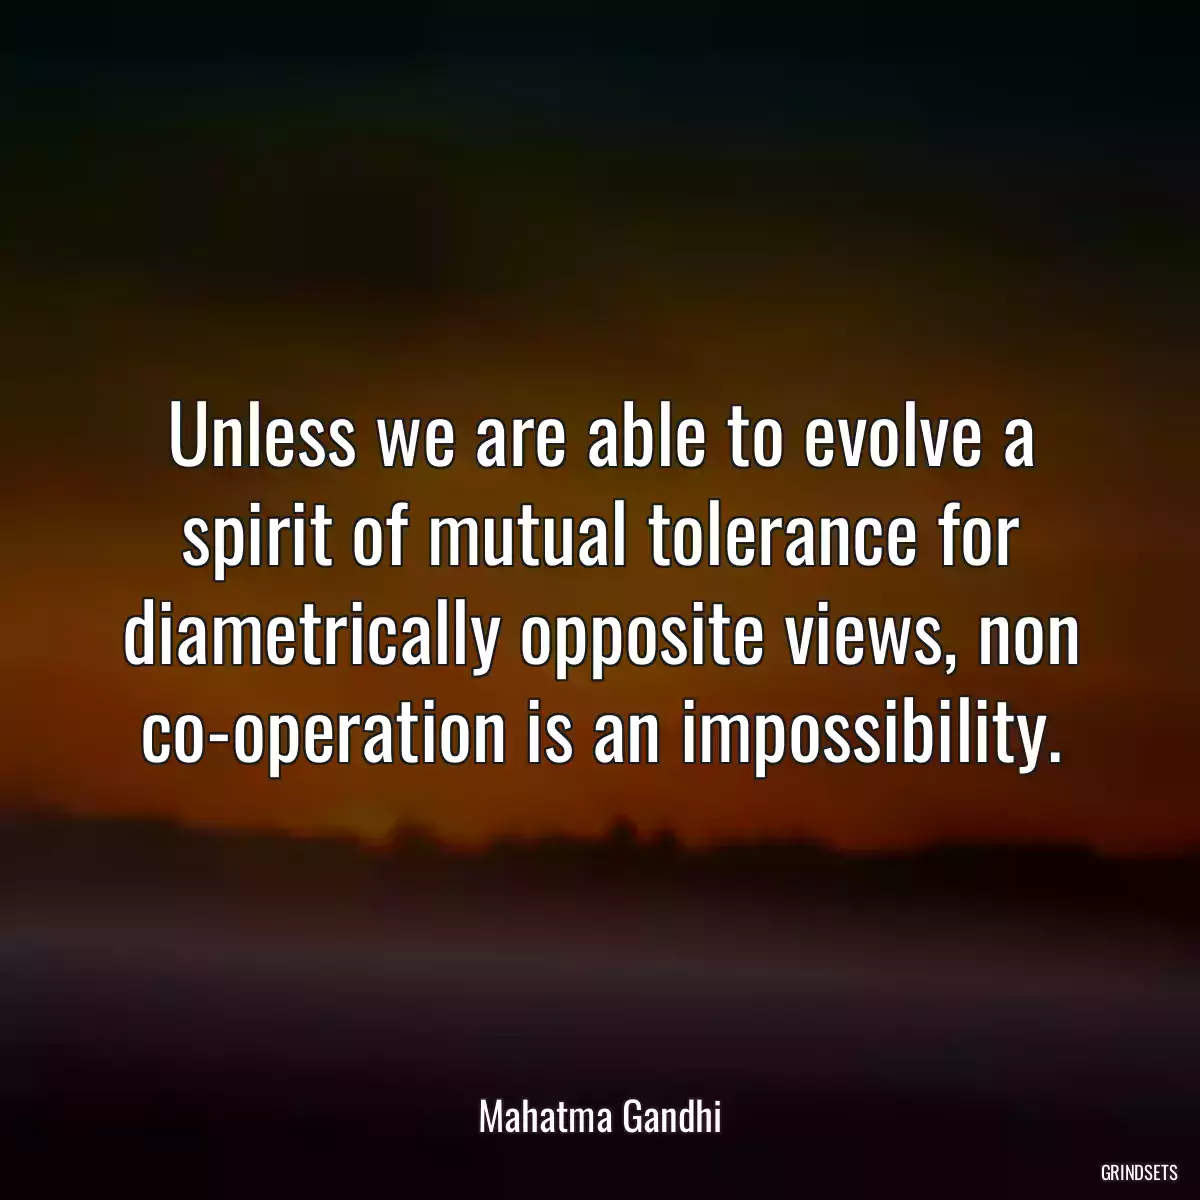 Unless we are able to evolve a spirit of mutual tolerance for diametrically opposite views, non co-operation is an impossibility.